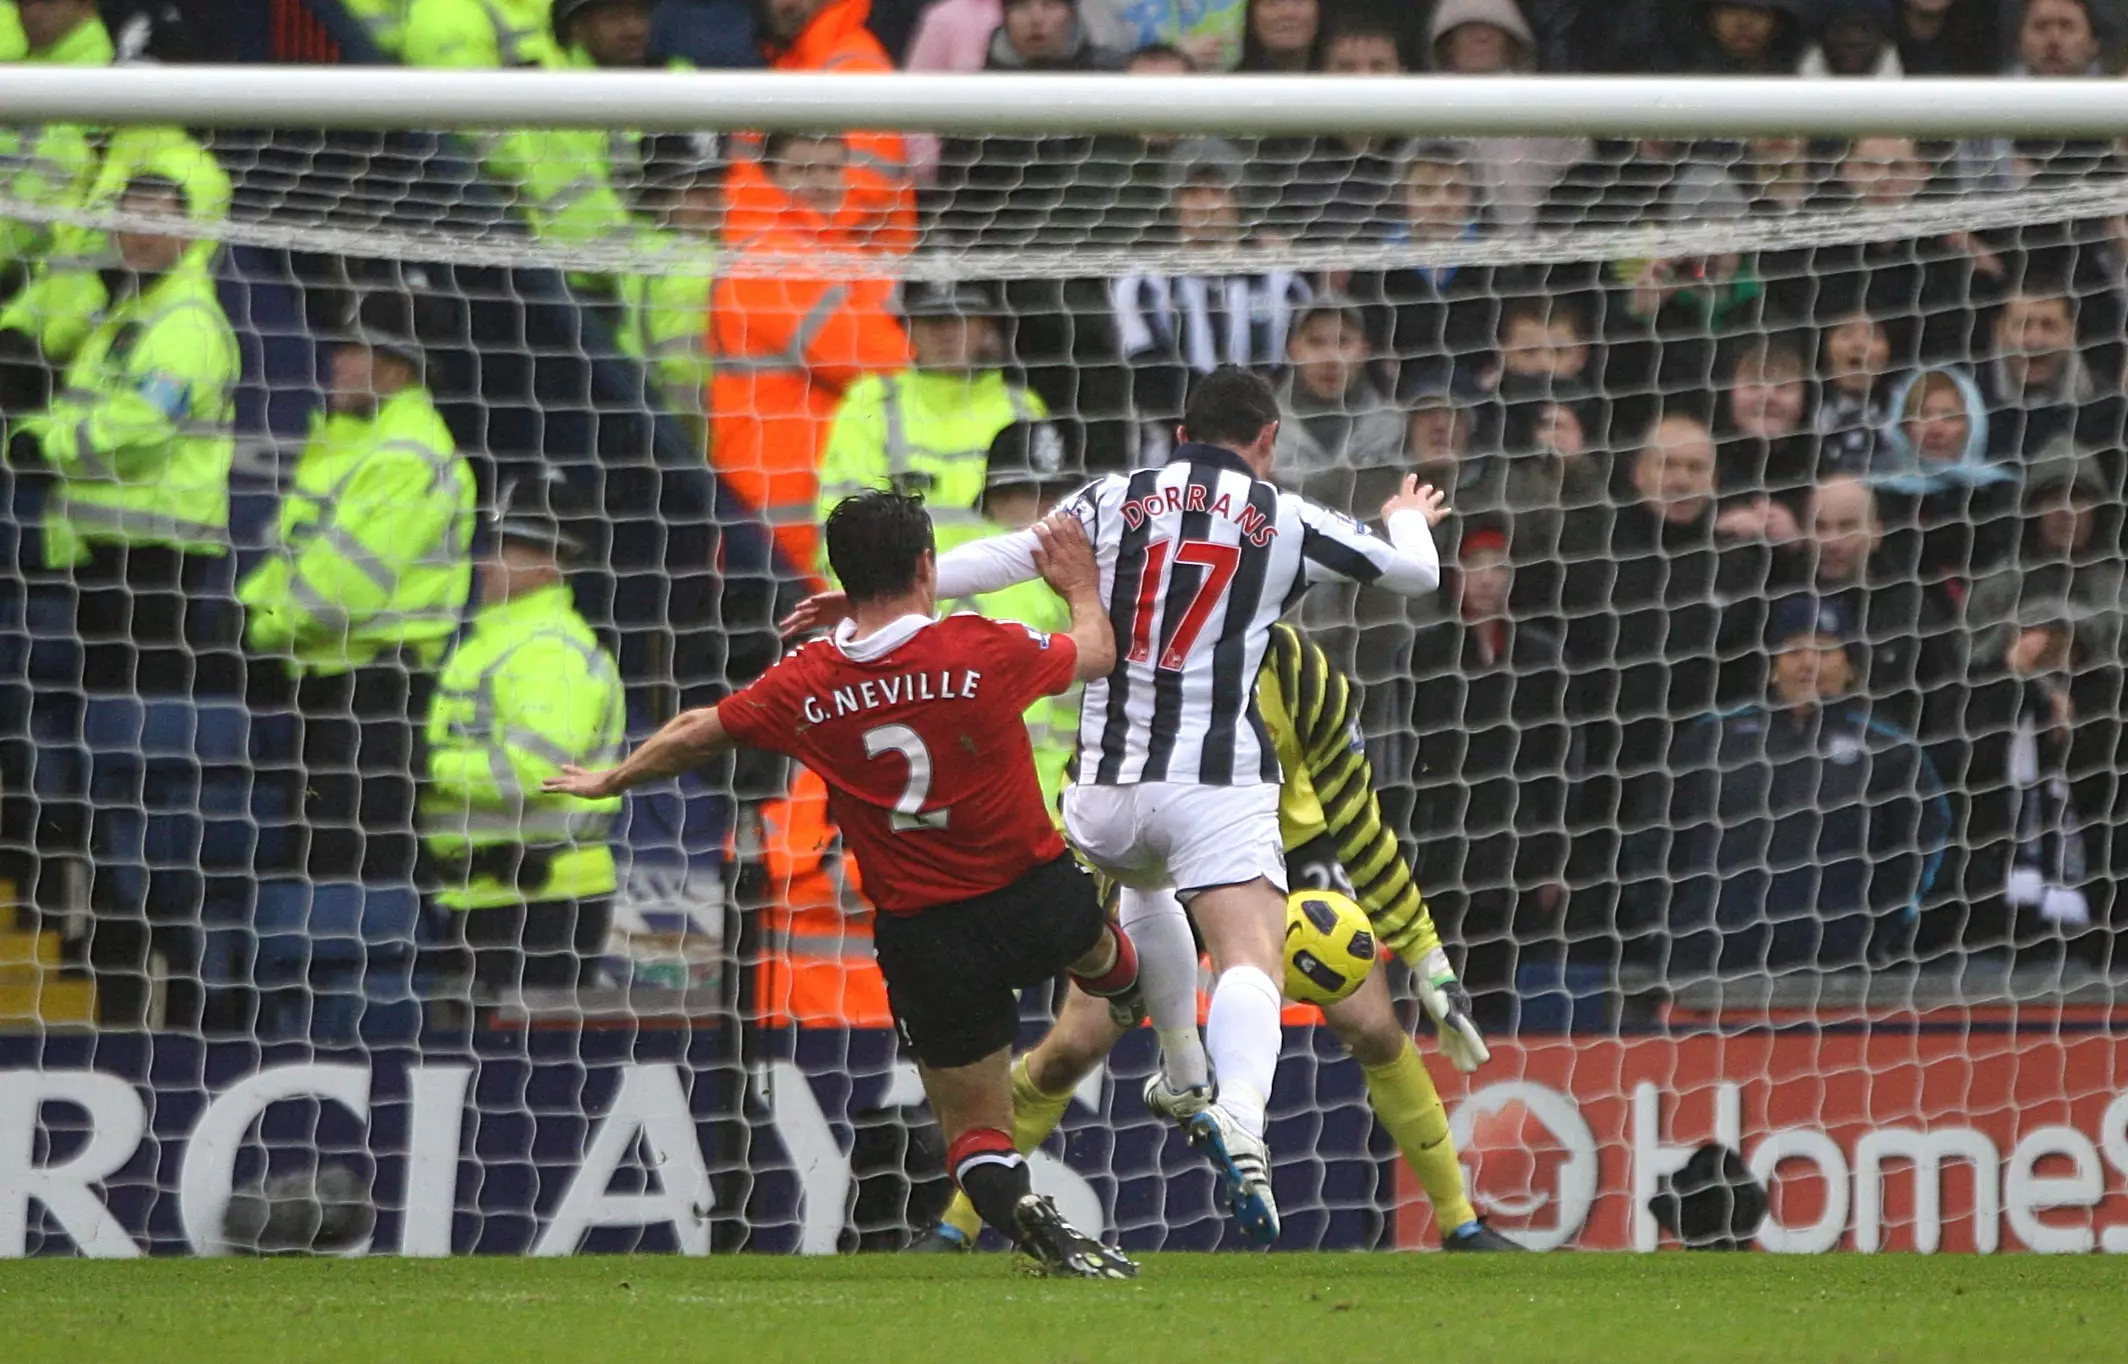 Neville's performance against West Brom in 2011 wasn't one of the former defender's finest moments, leading to his retirement not long afterwards. Image: PA